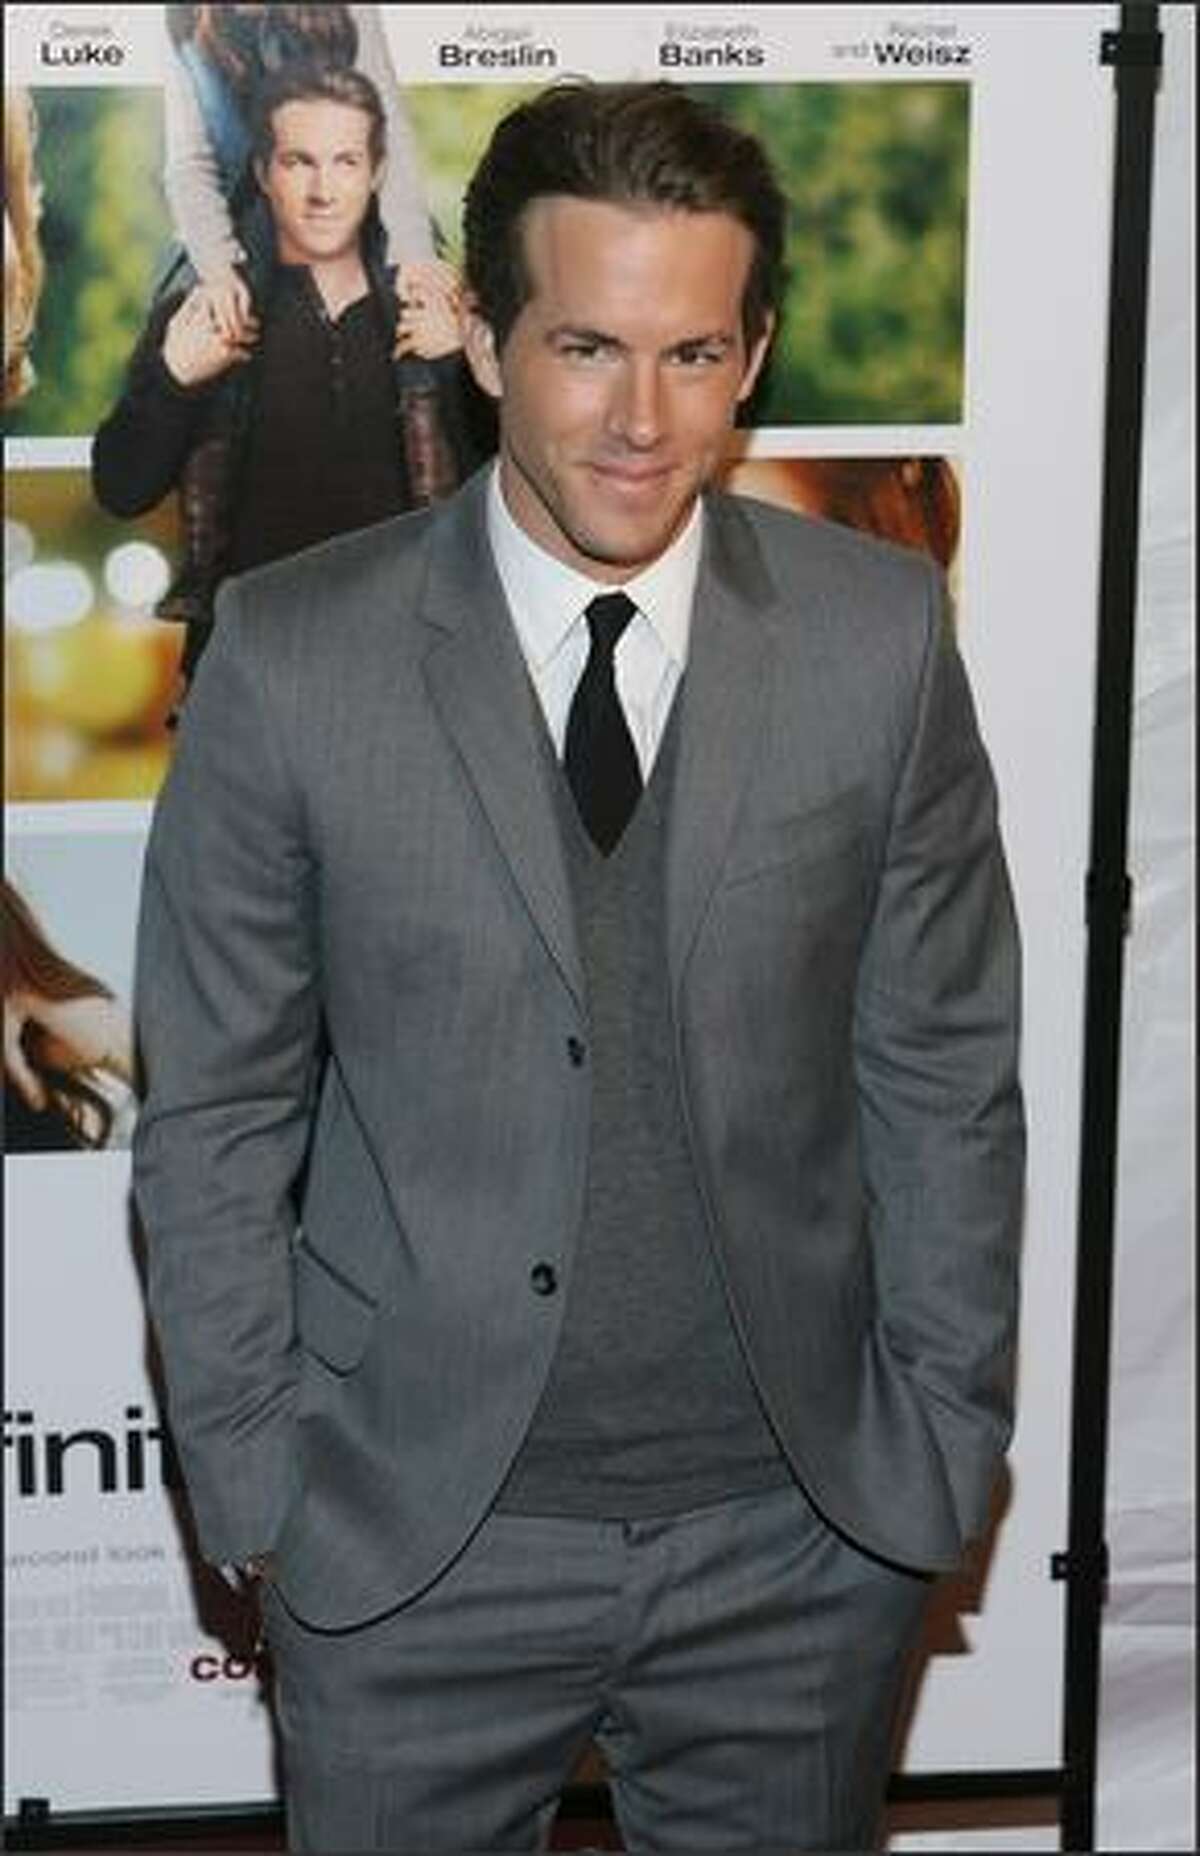 Actor Ryan Reynolds attends the premiere of "Definitely, Maybe" at the Ziegfeld Theater on Tuesday in New York City.